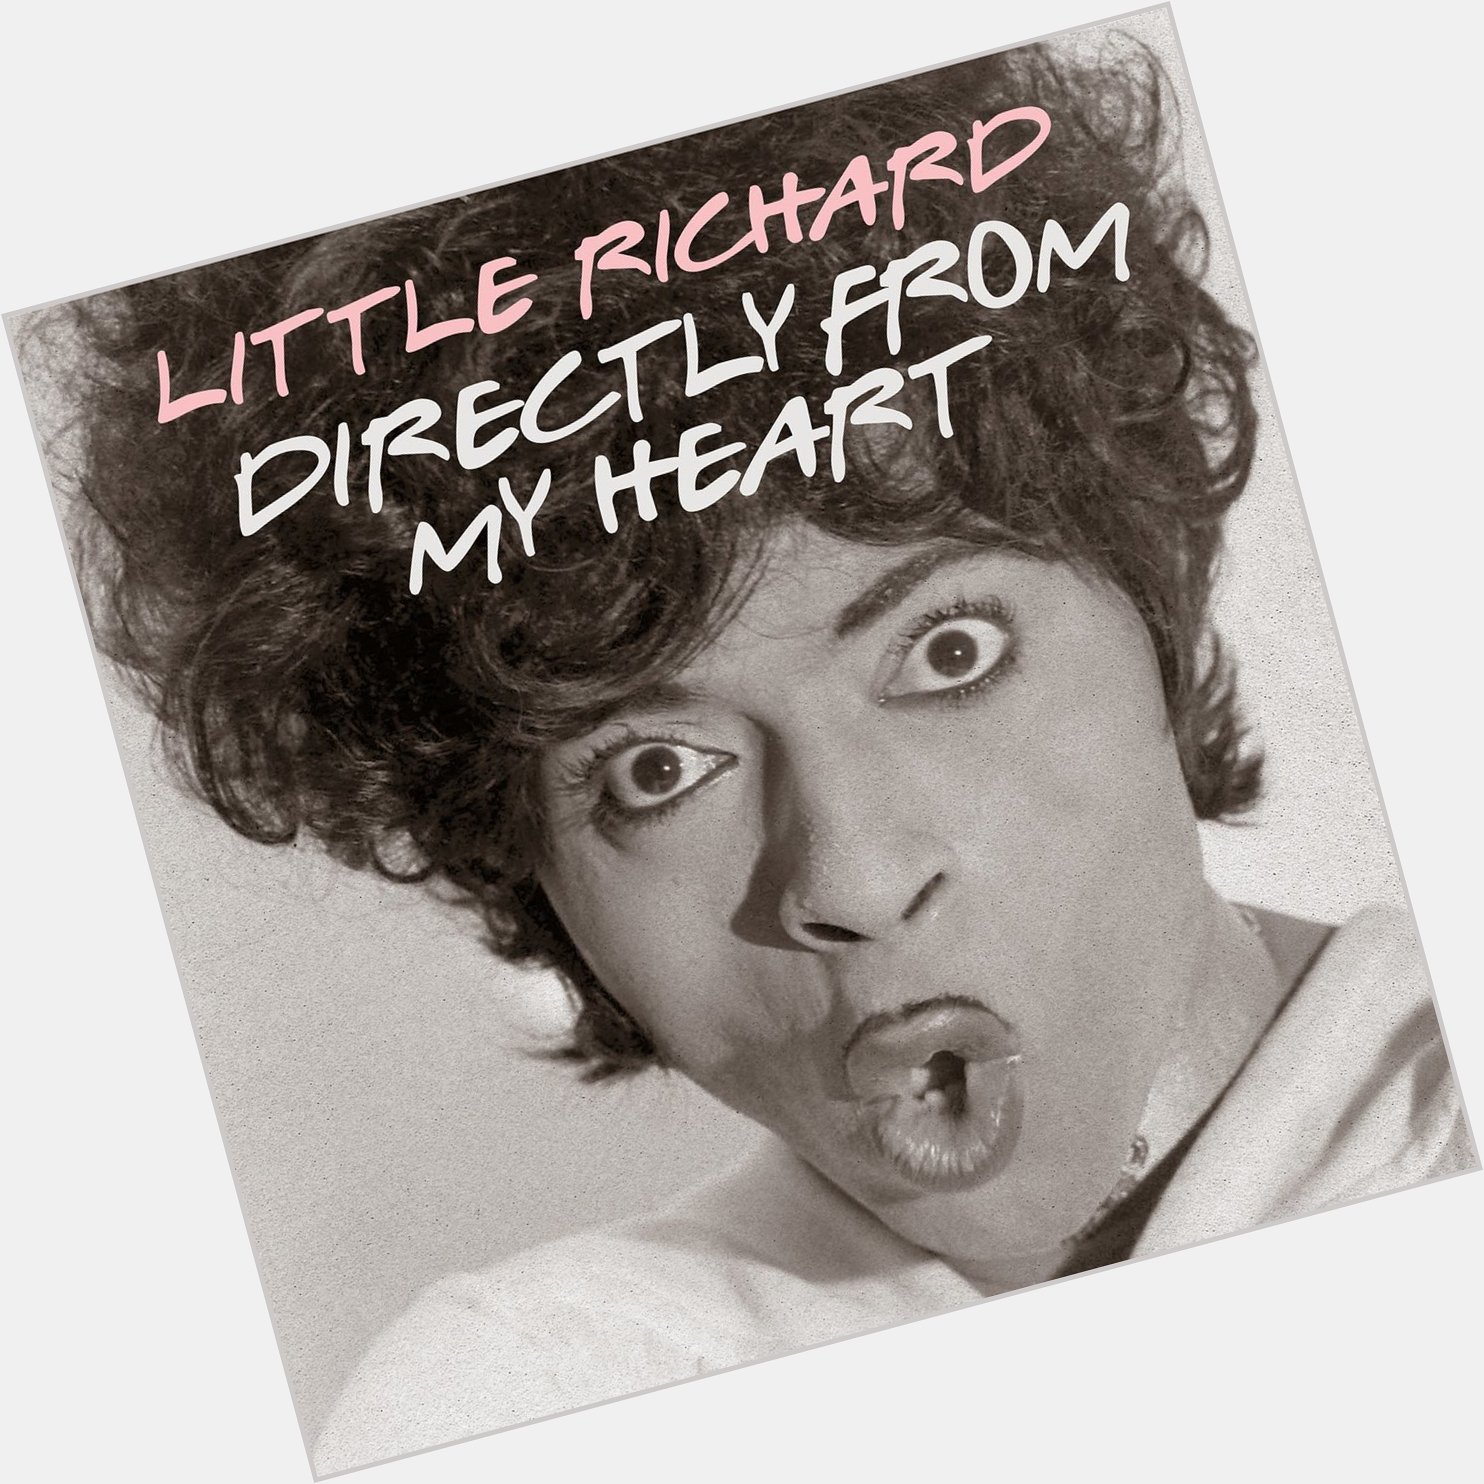 HAPPY BIRTHDAY TO THE ORIGINAL, ONE AND ONLY
REVEREND \"LITTLE\" RICHARD PENNIMAN! 